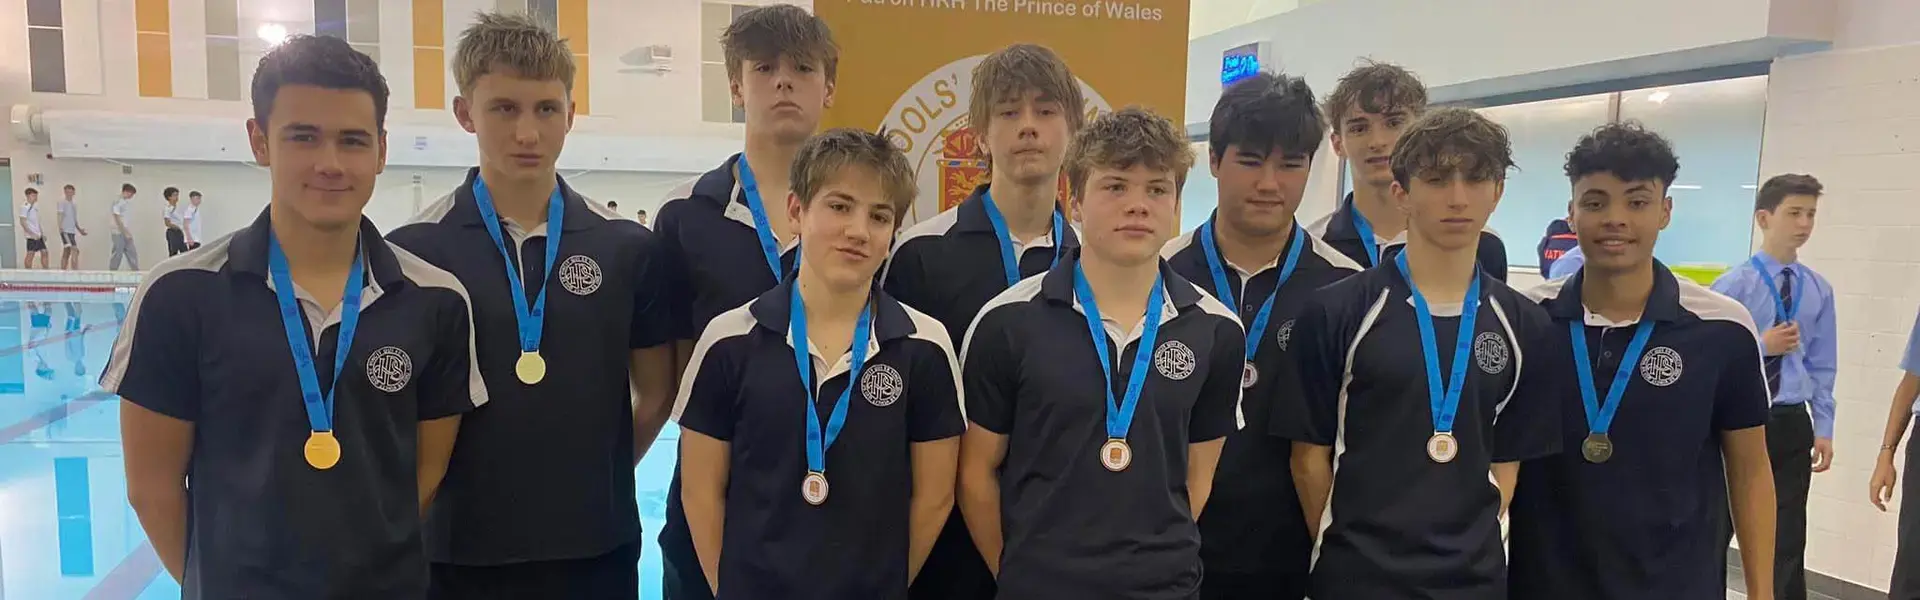 Senior pupils with gold medals for swimming at Ibstock Place School, a private school near Richmond, Barnes, Putney, Kingston, and Wandsworth.